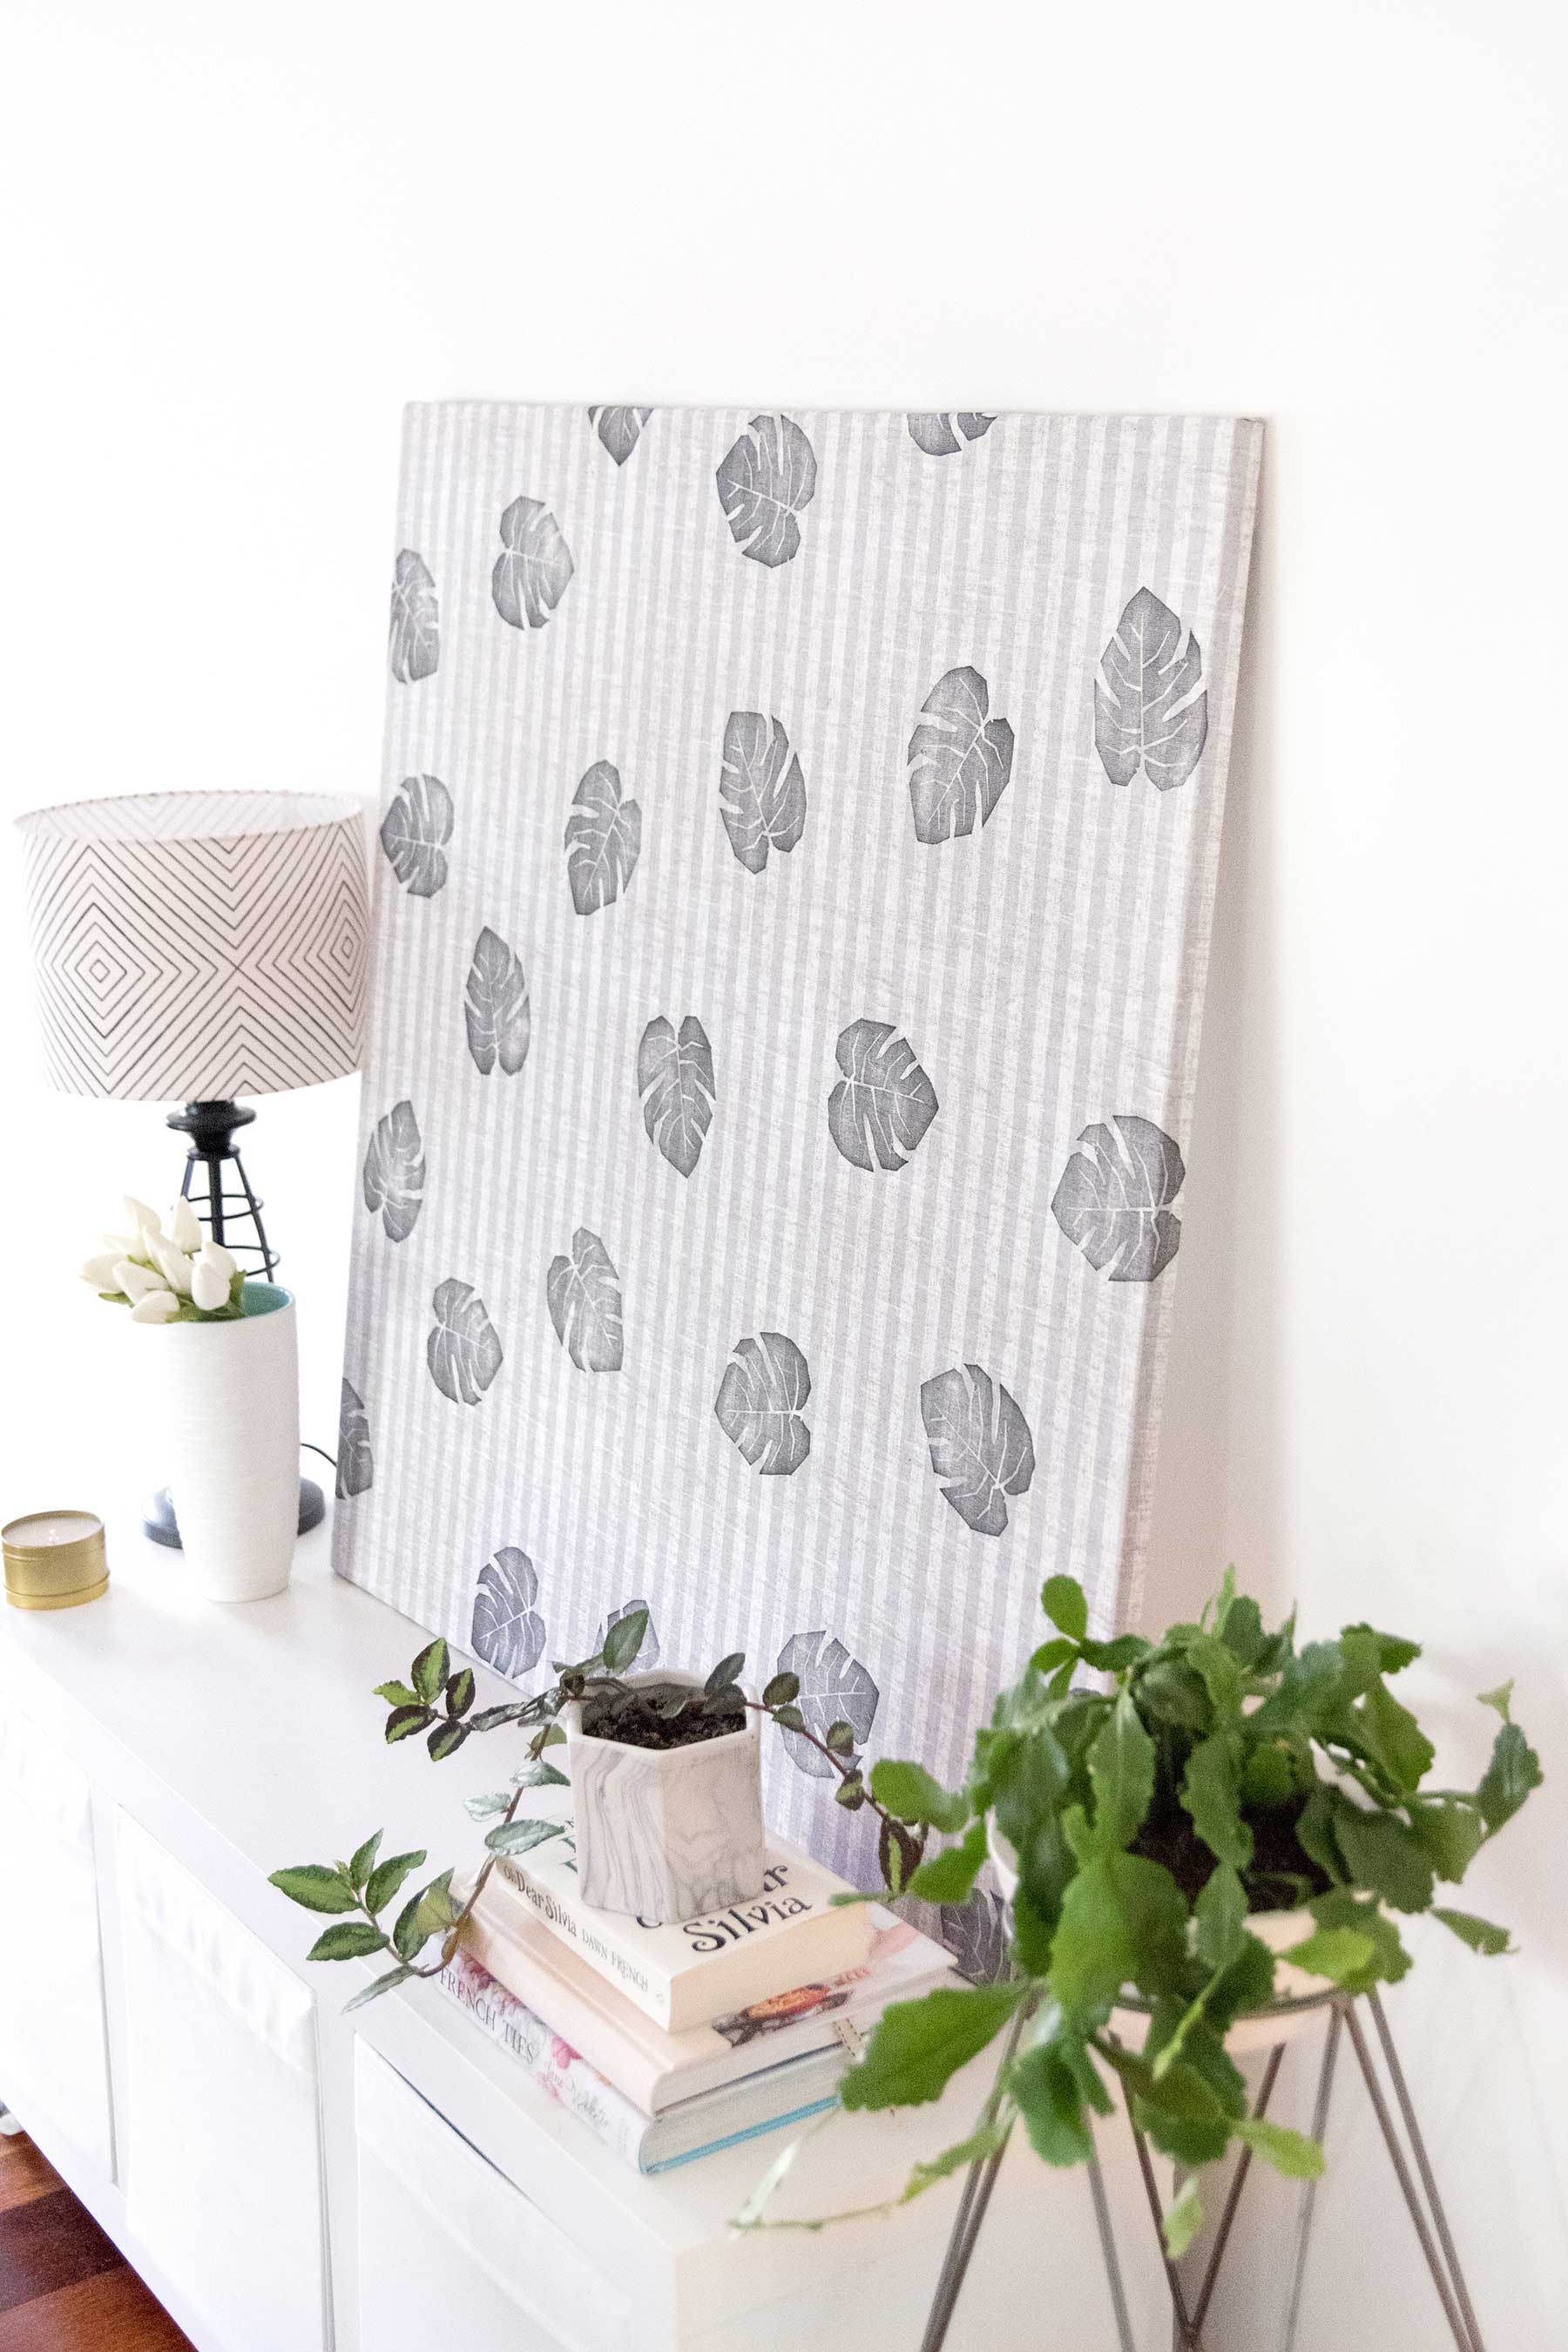 New Diy Fabric Wall Art for Large Space